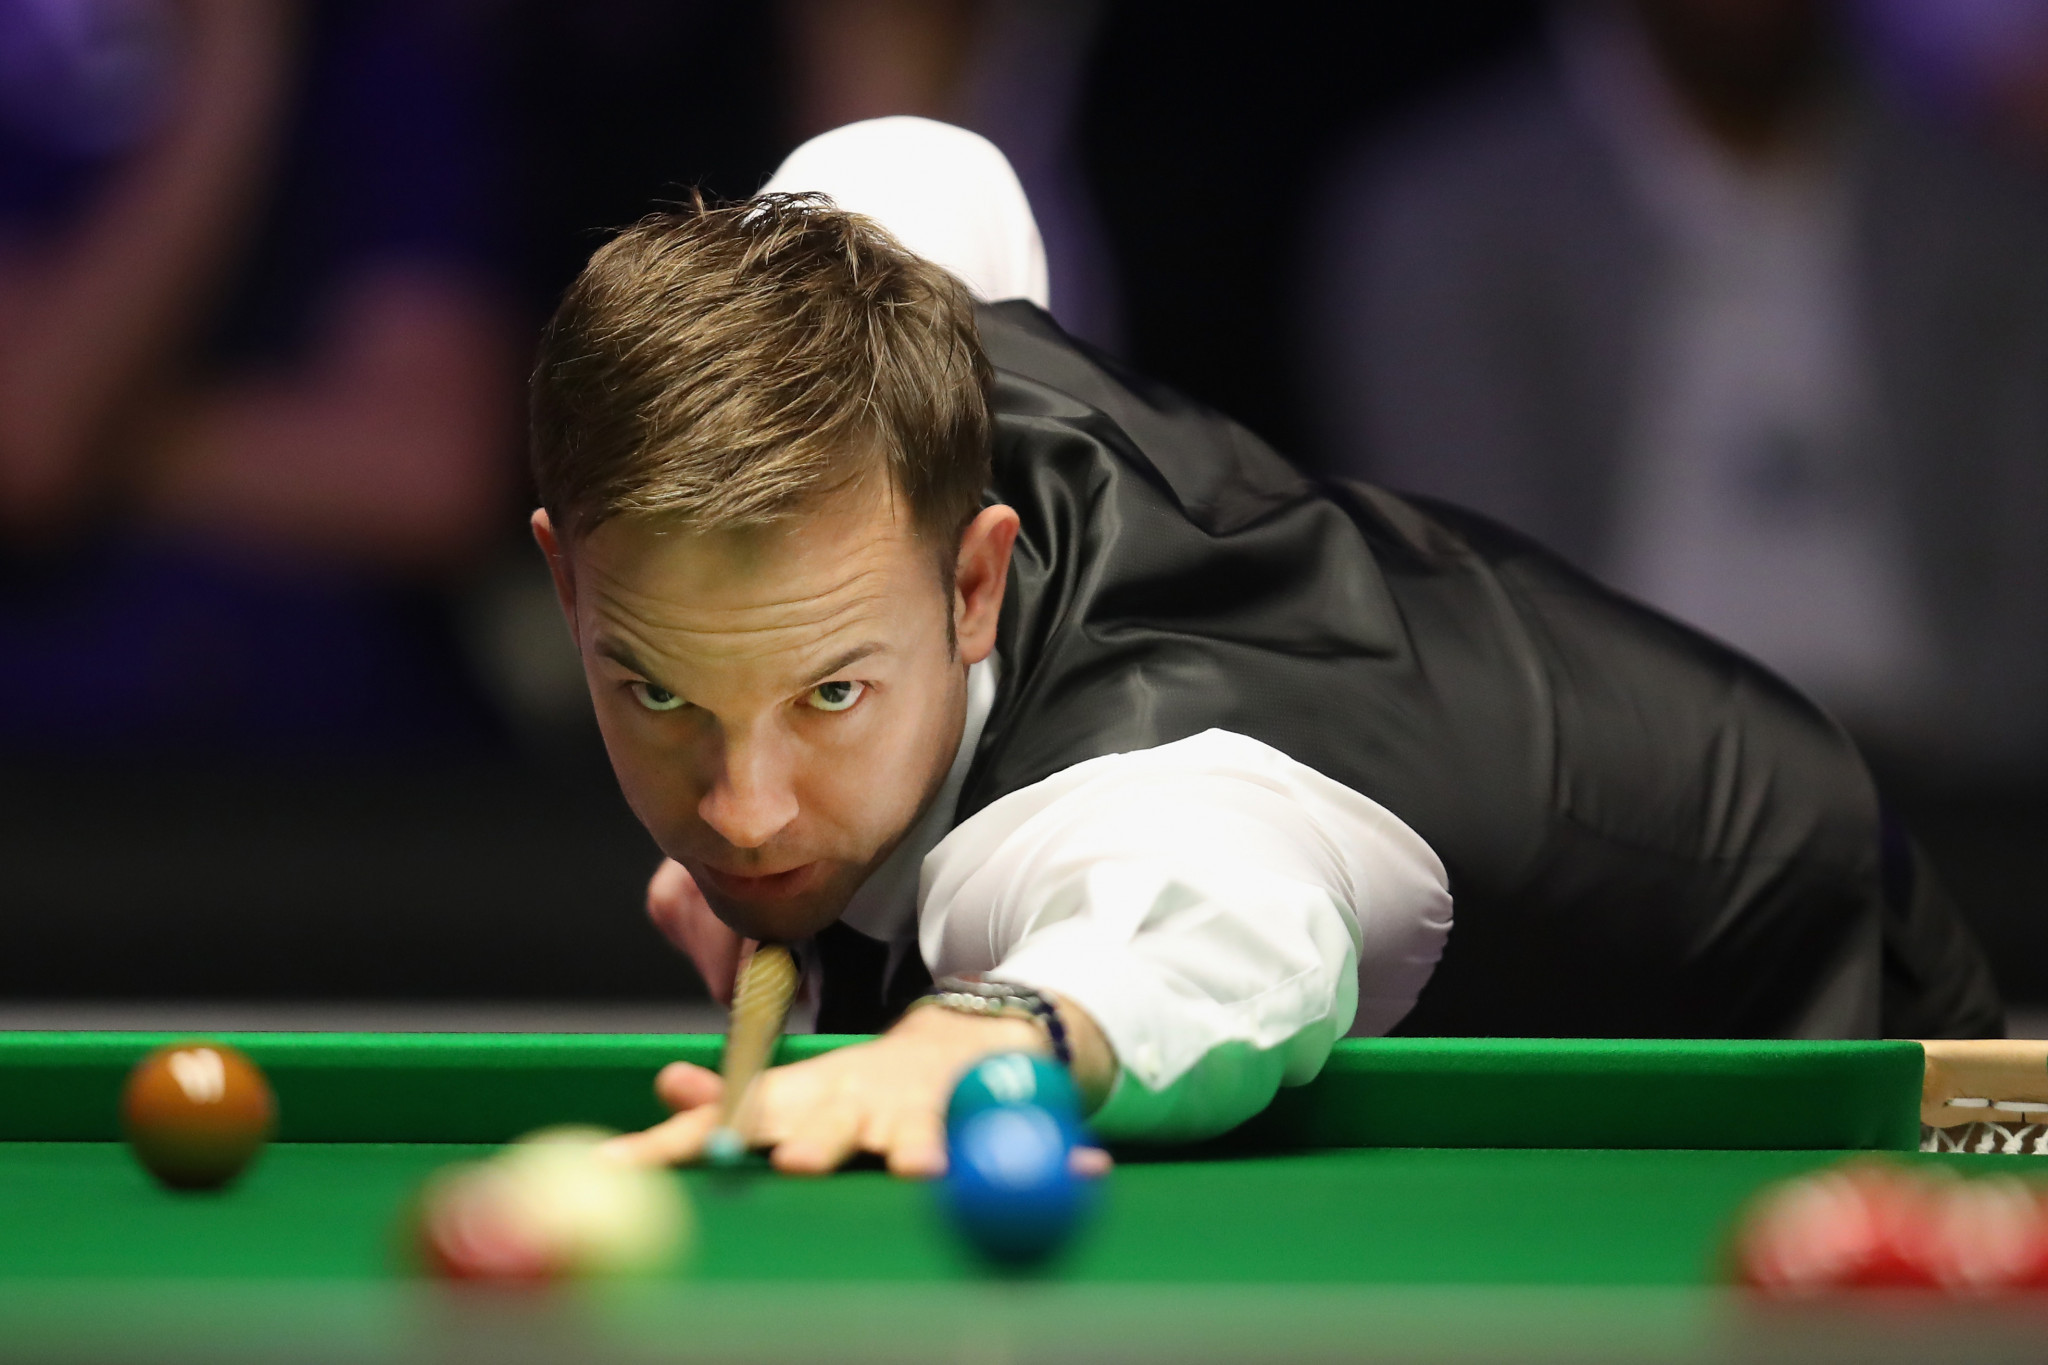 Ali Carter upset the odds to beat five-time champion Ronnie O’Sullivan and earn a place in the quarter-finals of the World Snooker Championships in Sheffield ©Getty Images